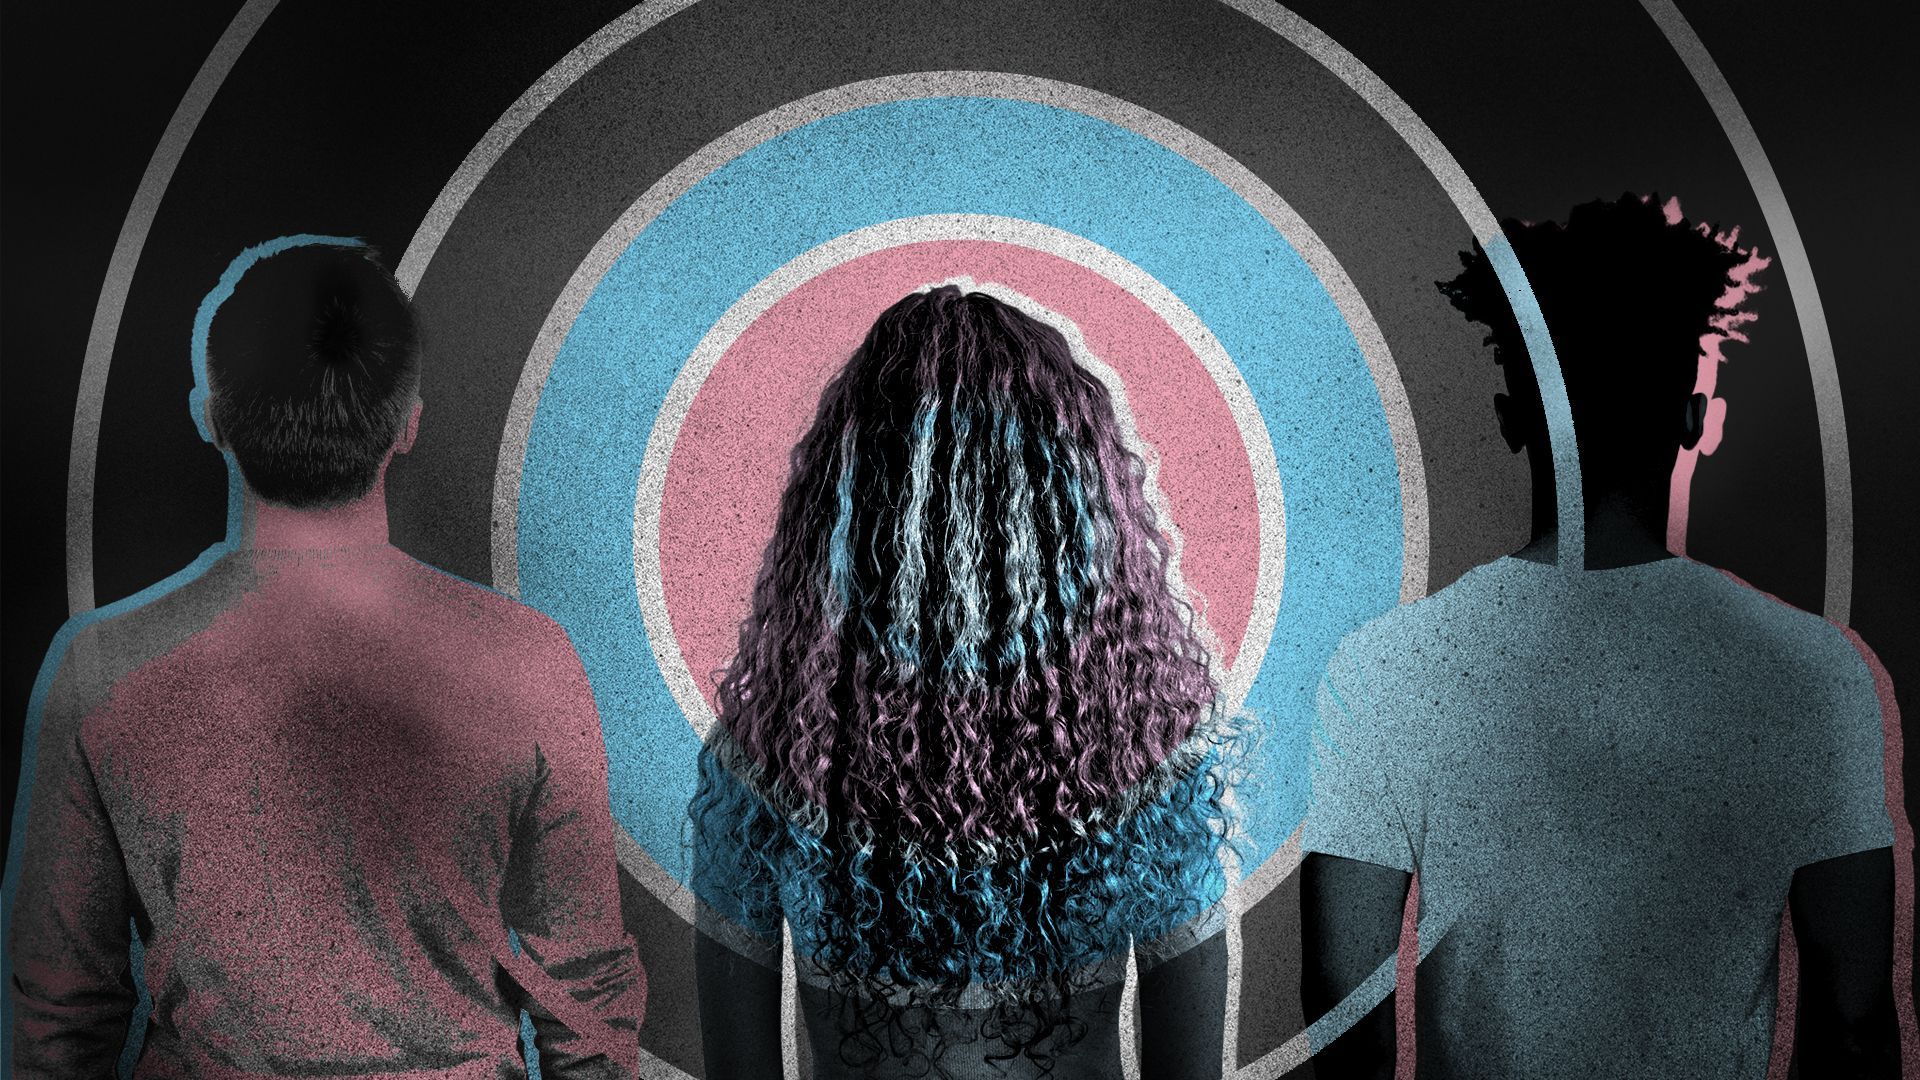 Illustration of three people in front of a target made of the Transgender Pride flag colors.